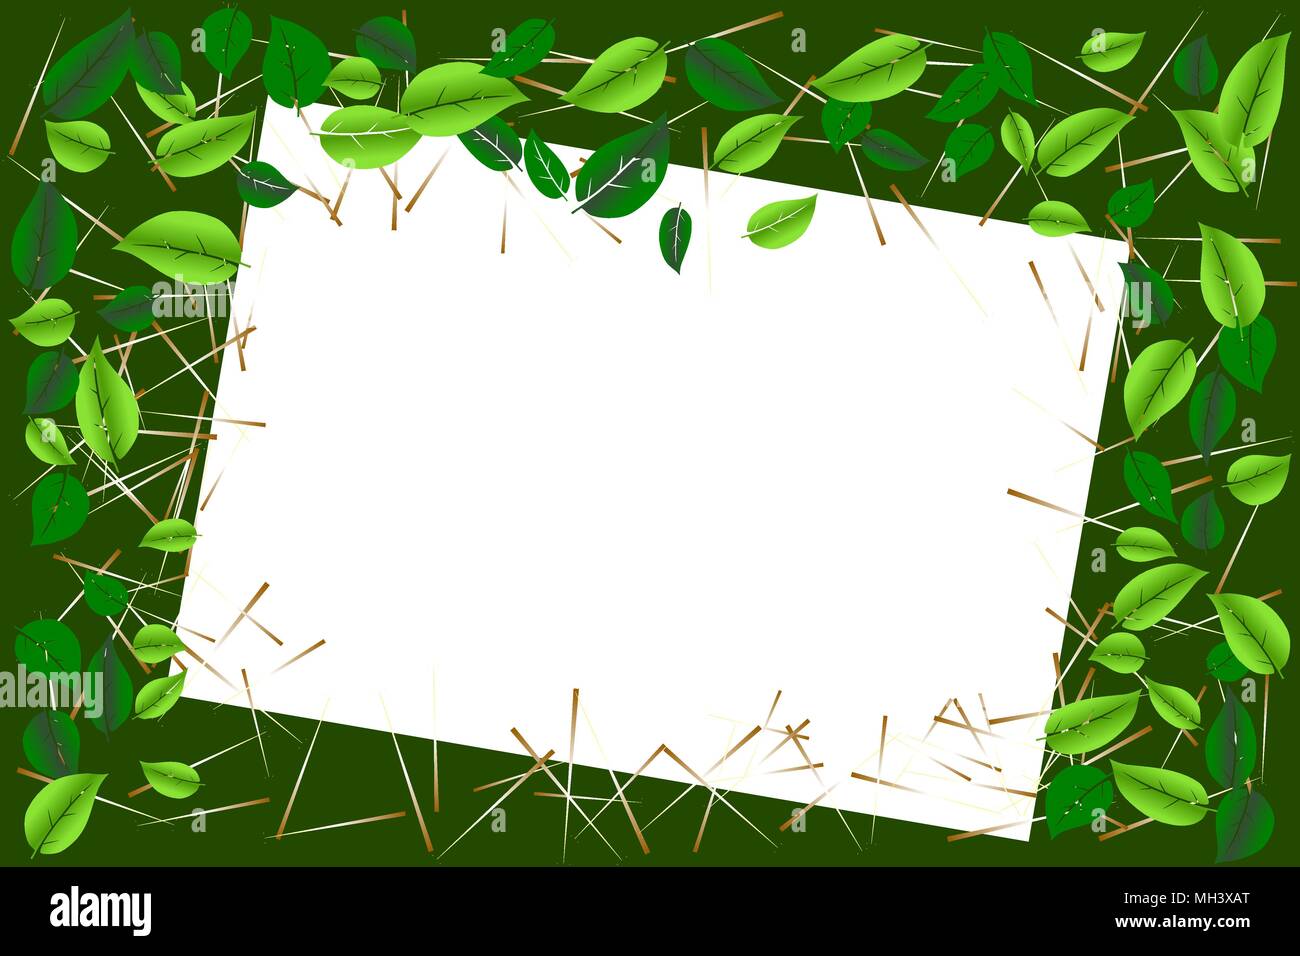 Environmental concept. Green leaves border frame with white (transparent) paper for text or image. Vector illustration, EPS 10. Stock Vector